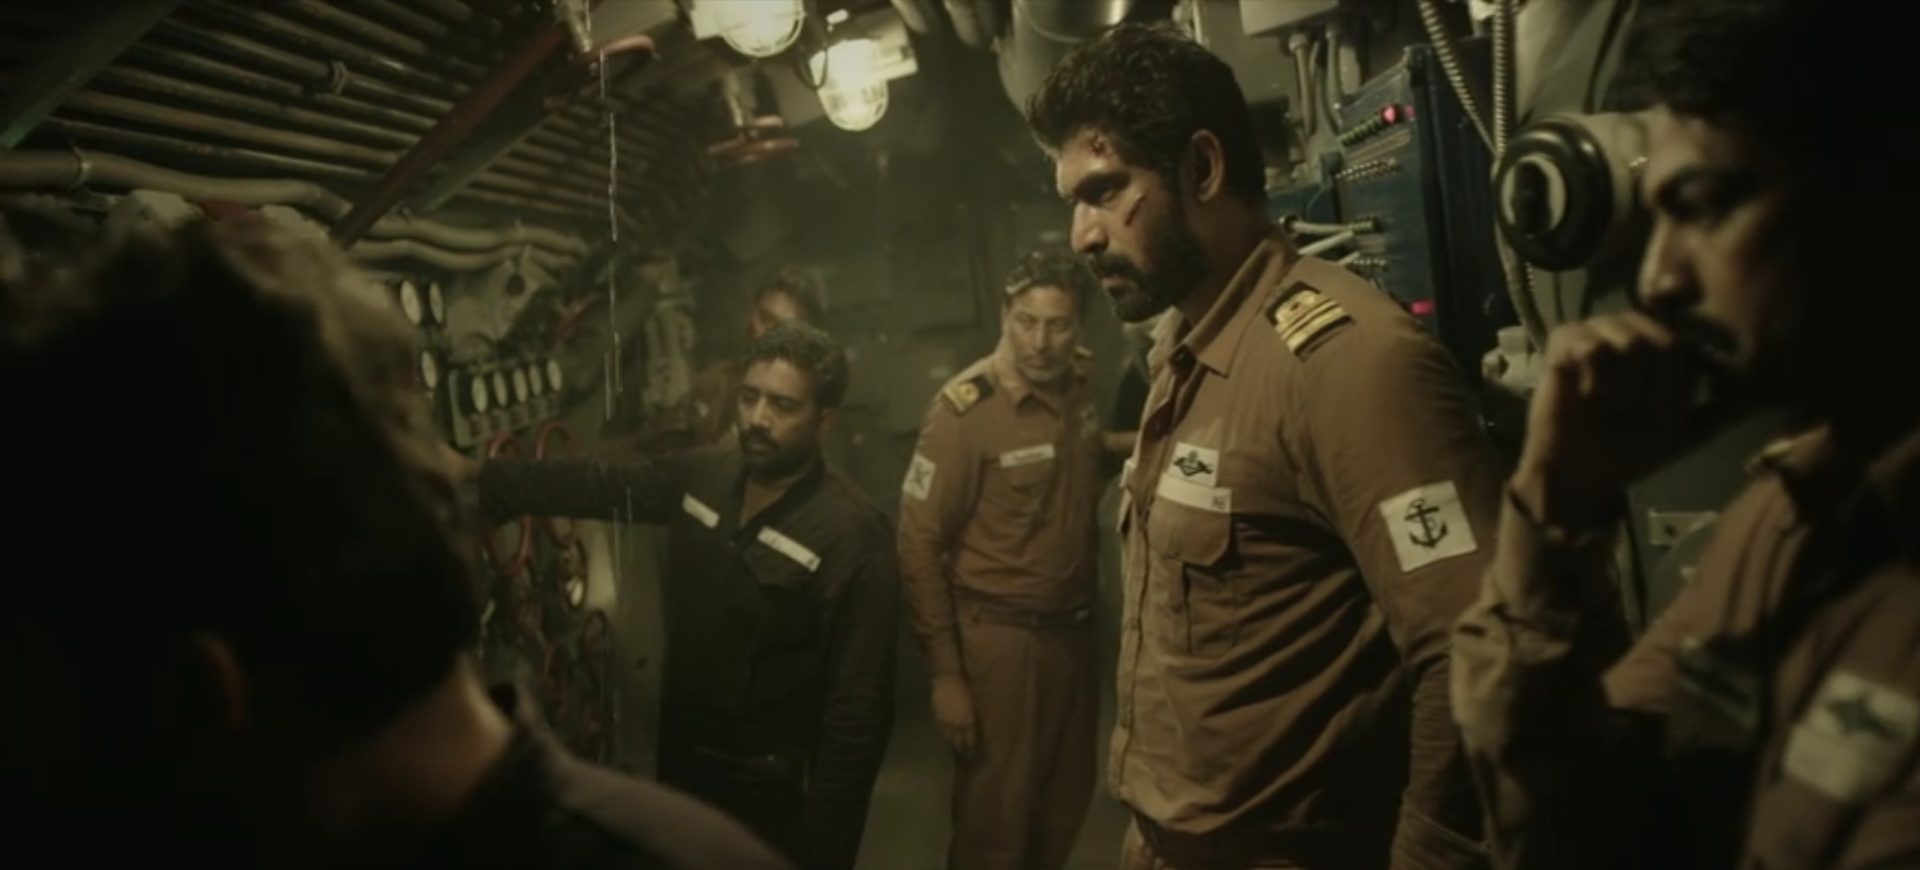 Rana Daggubati as submarine commander with his face slightly wounded in a tense atmosphere.